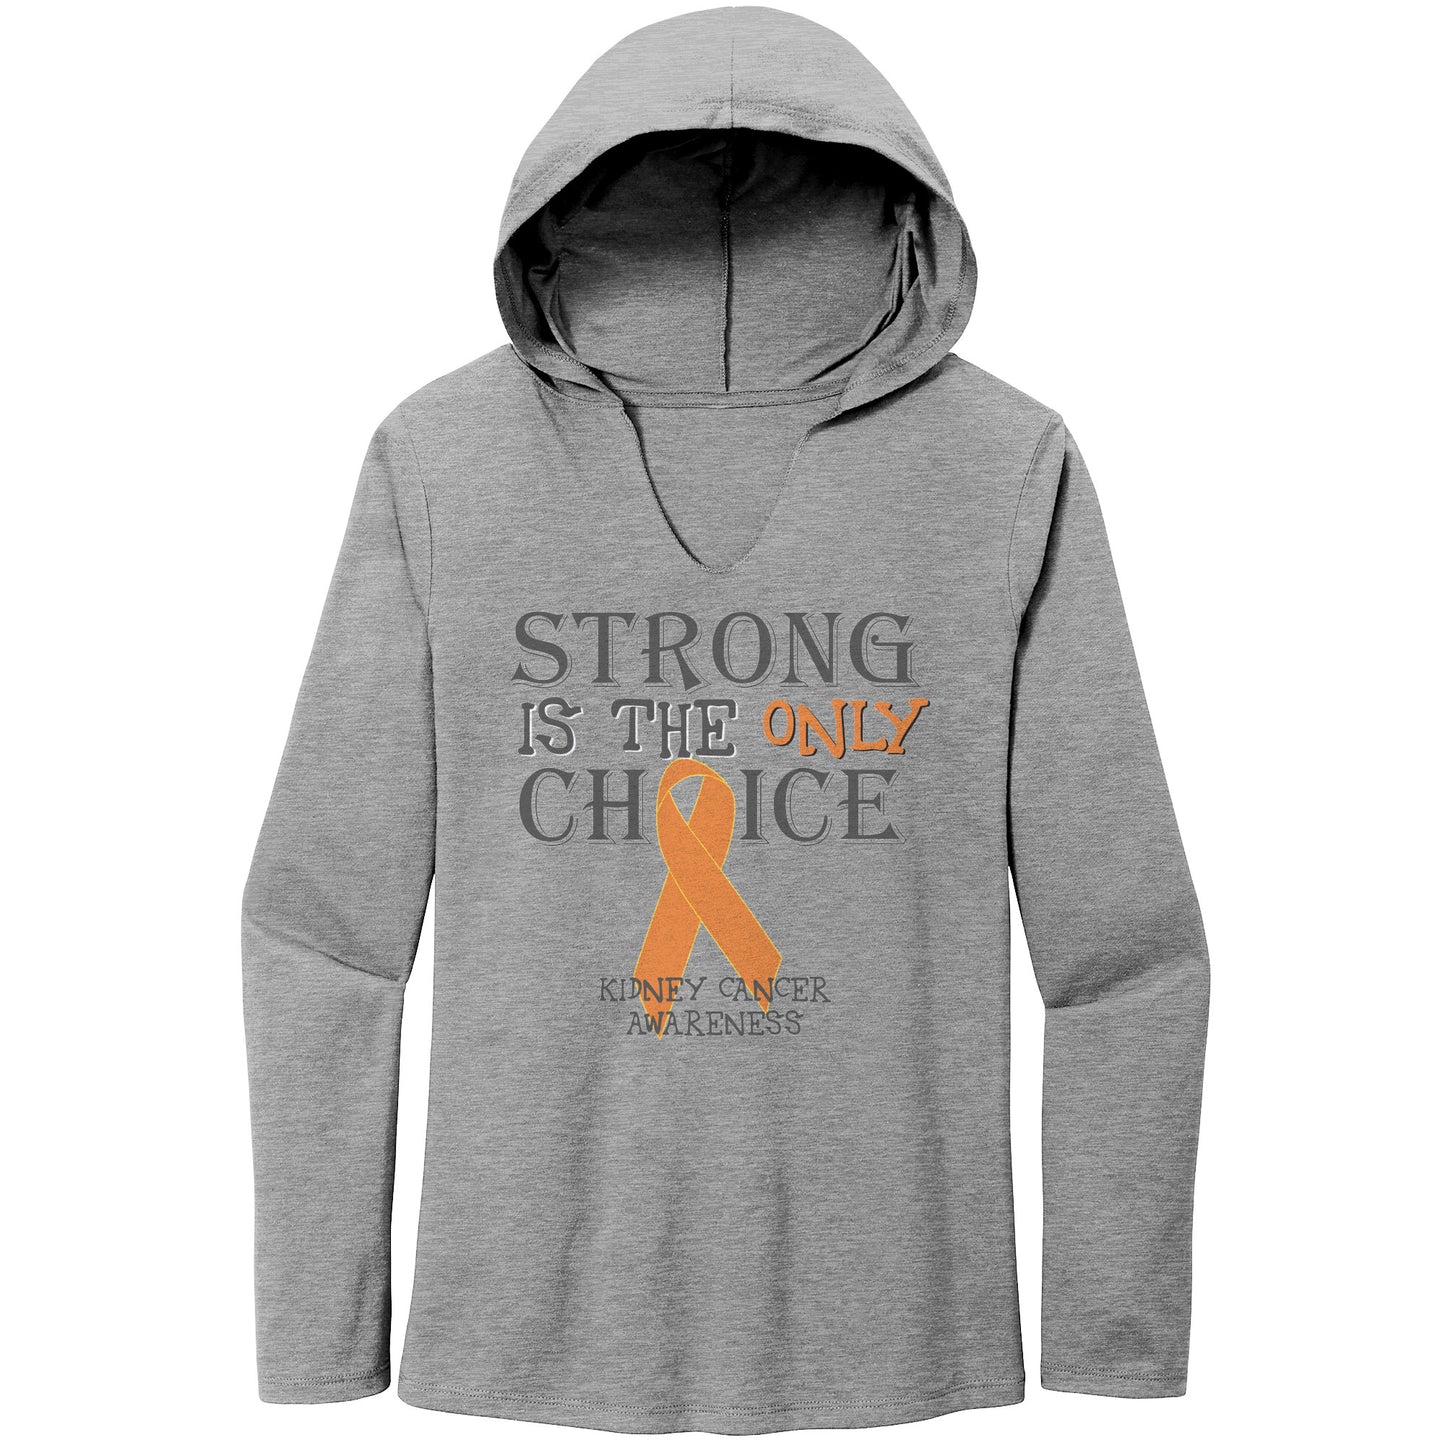 Strong is the Only Choice -Kidney Cancer Awareness T-Shirt, Hoodie, Tank